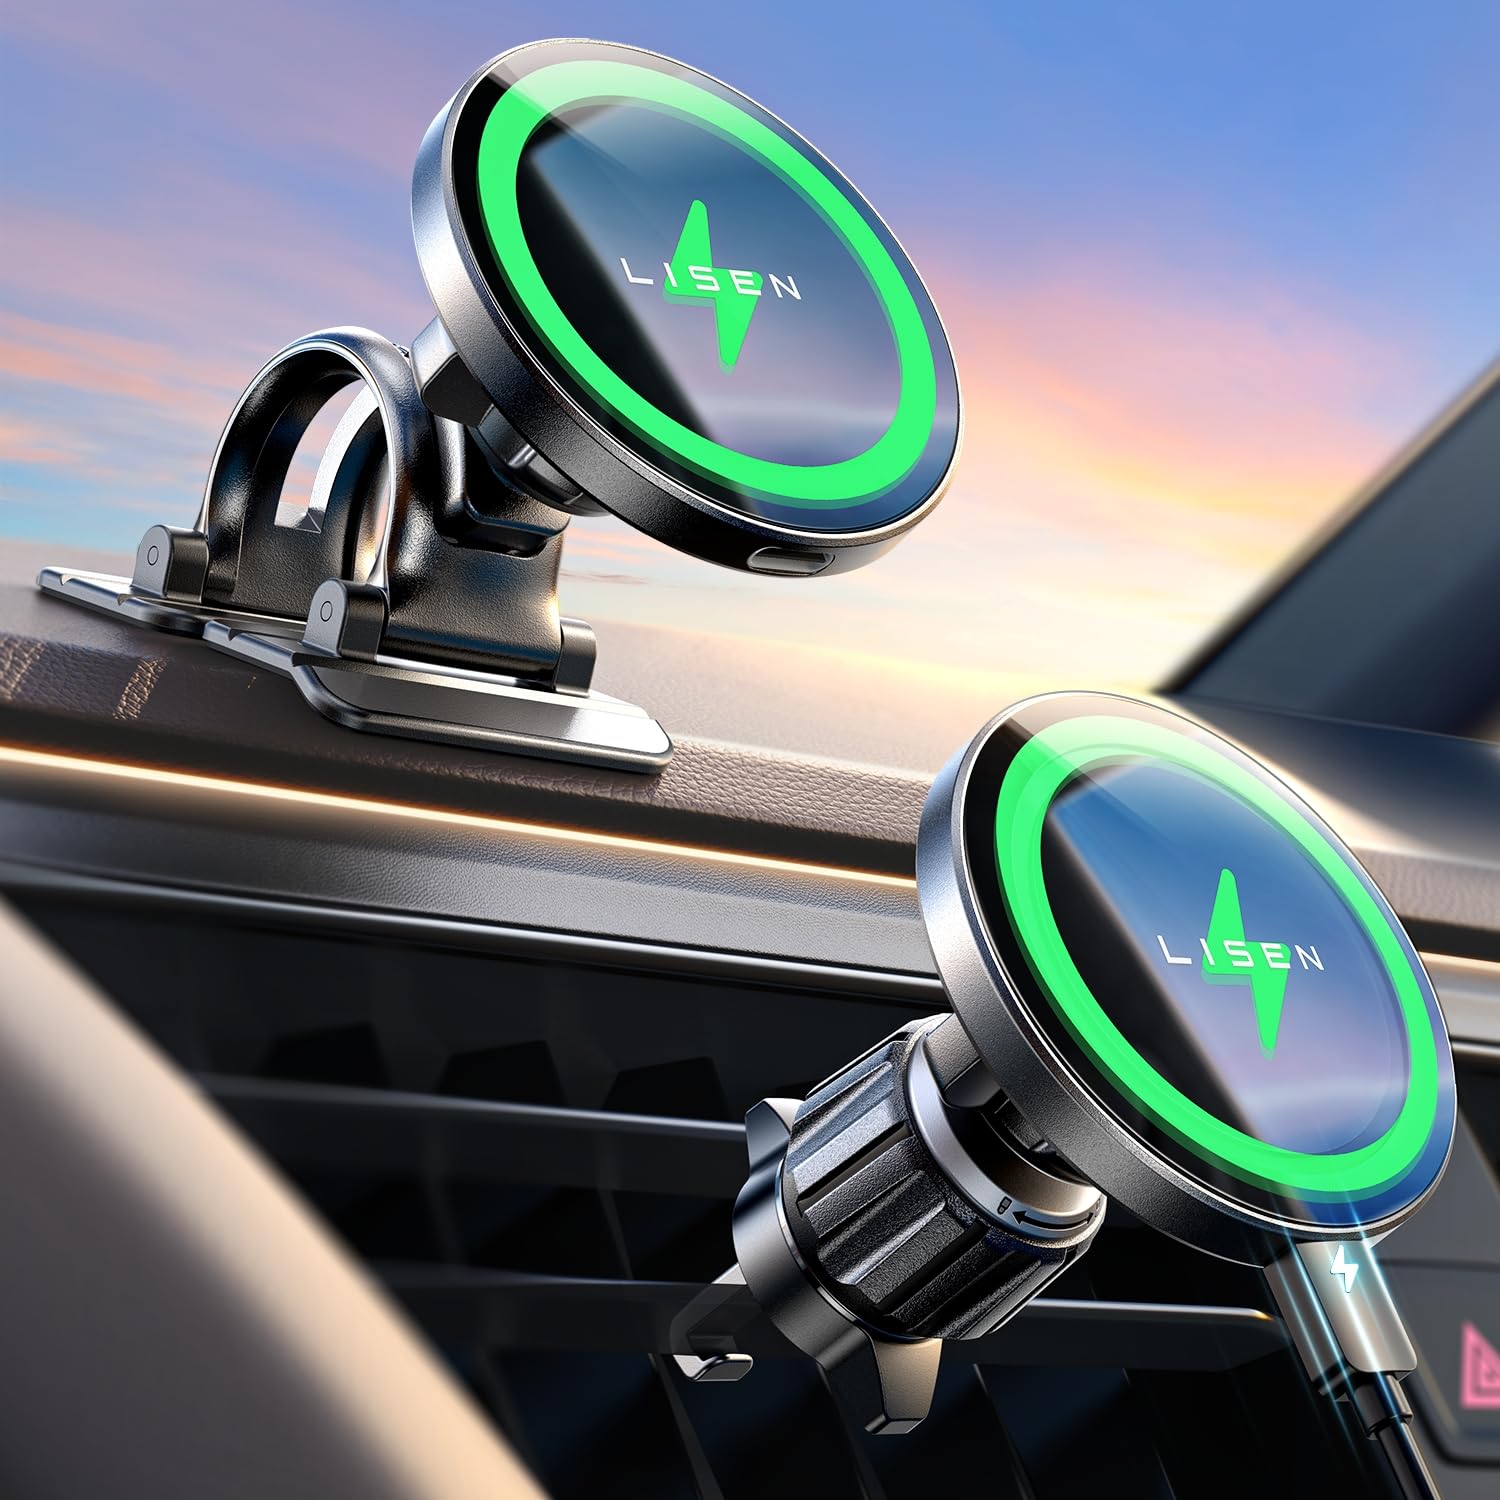 LISEN Magsafe Vent & Dashboard Car Mount Charger $13.49 + Free Shipping w/PRIME